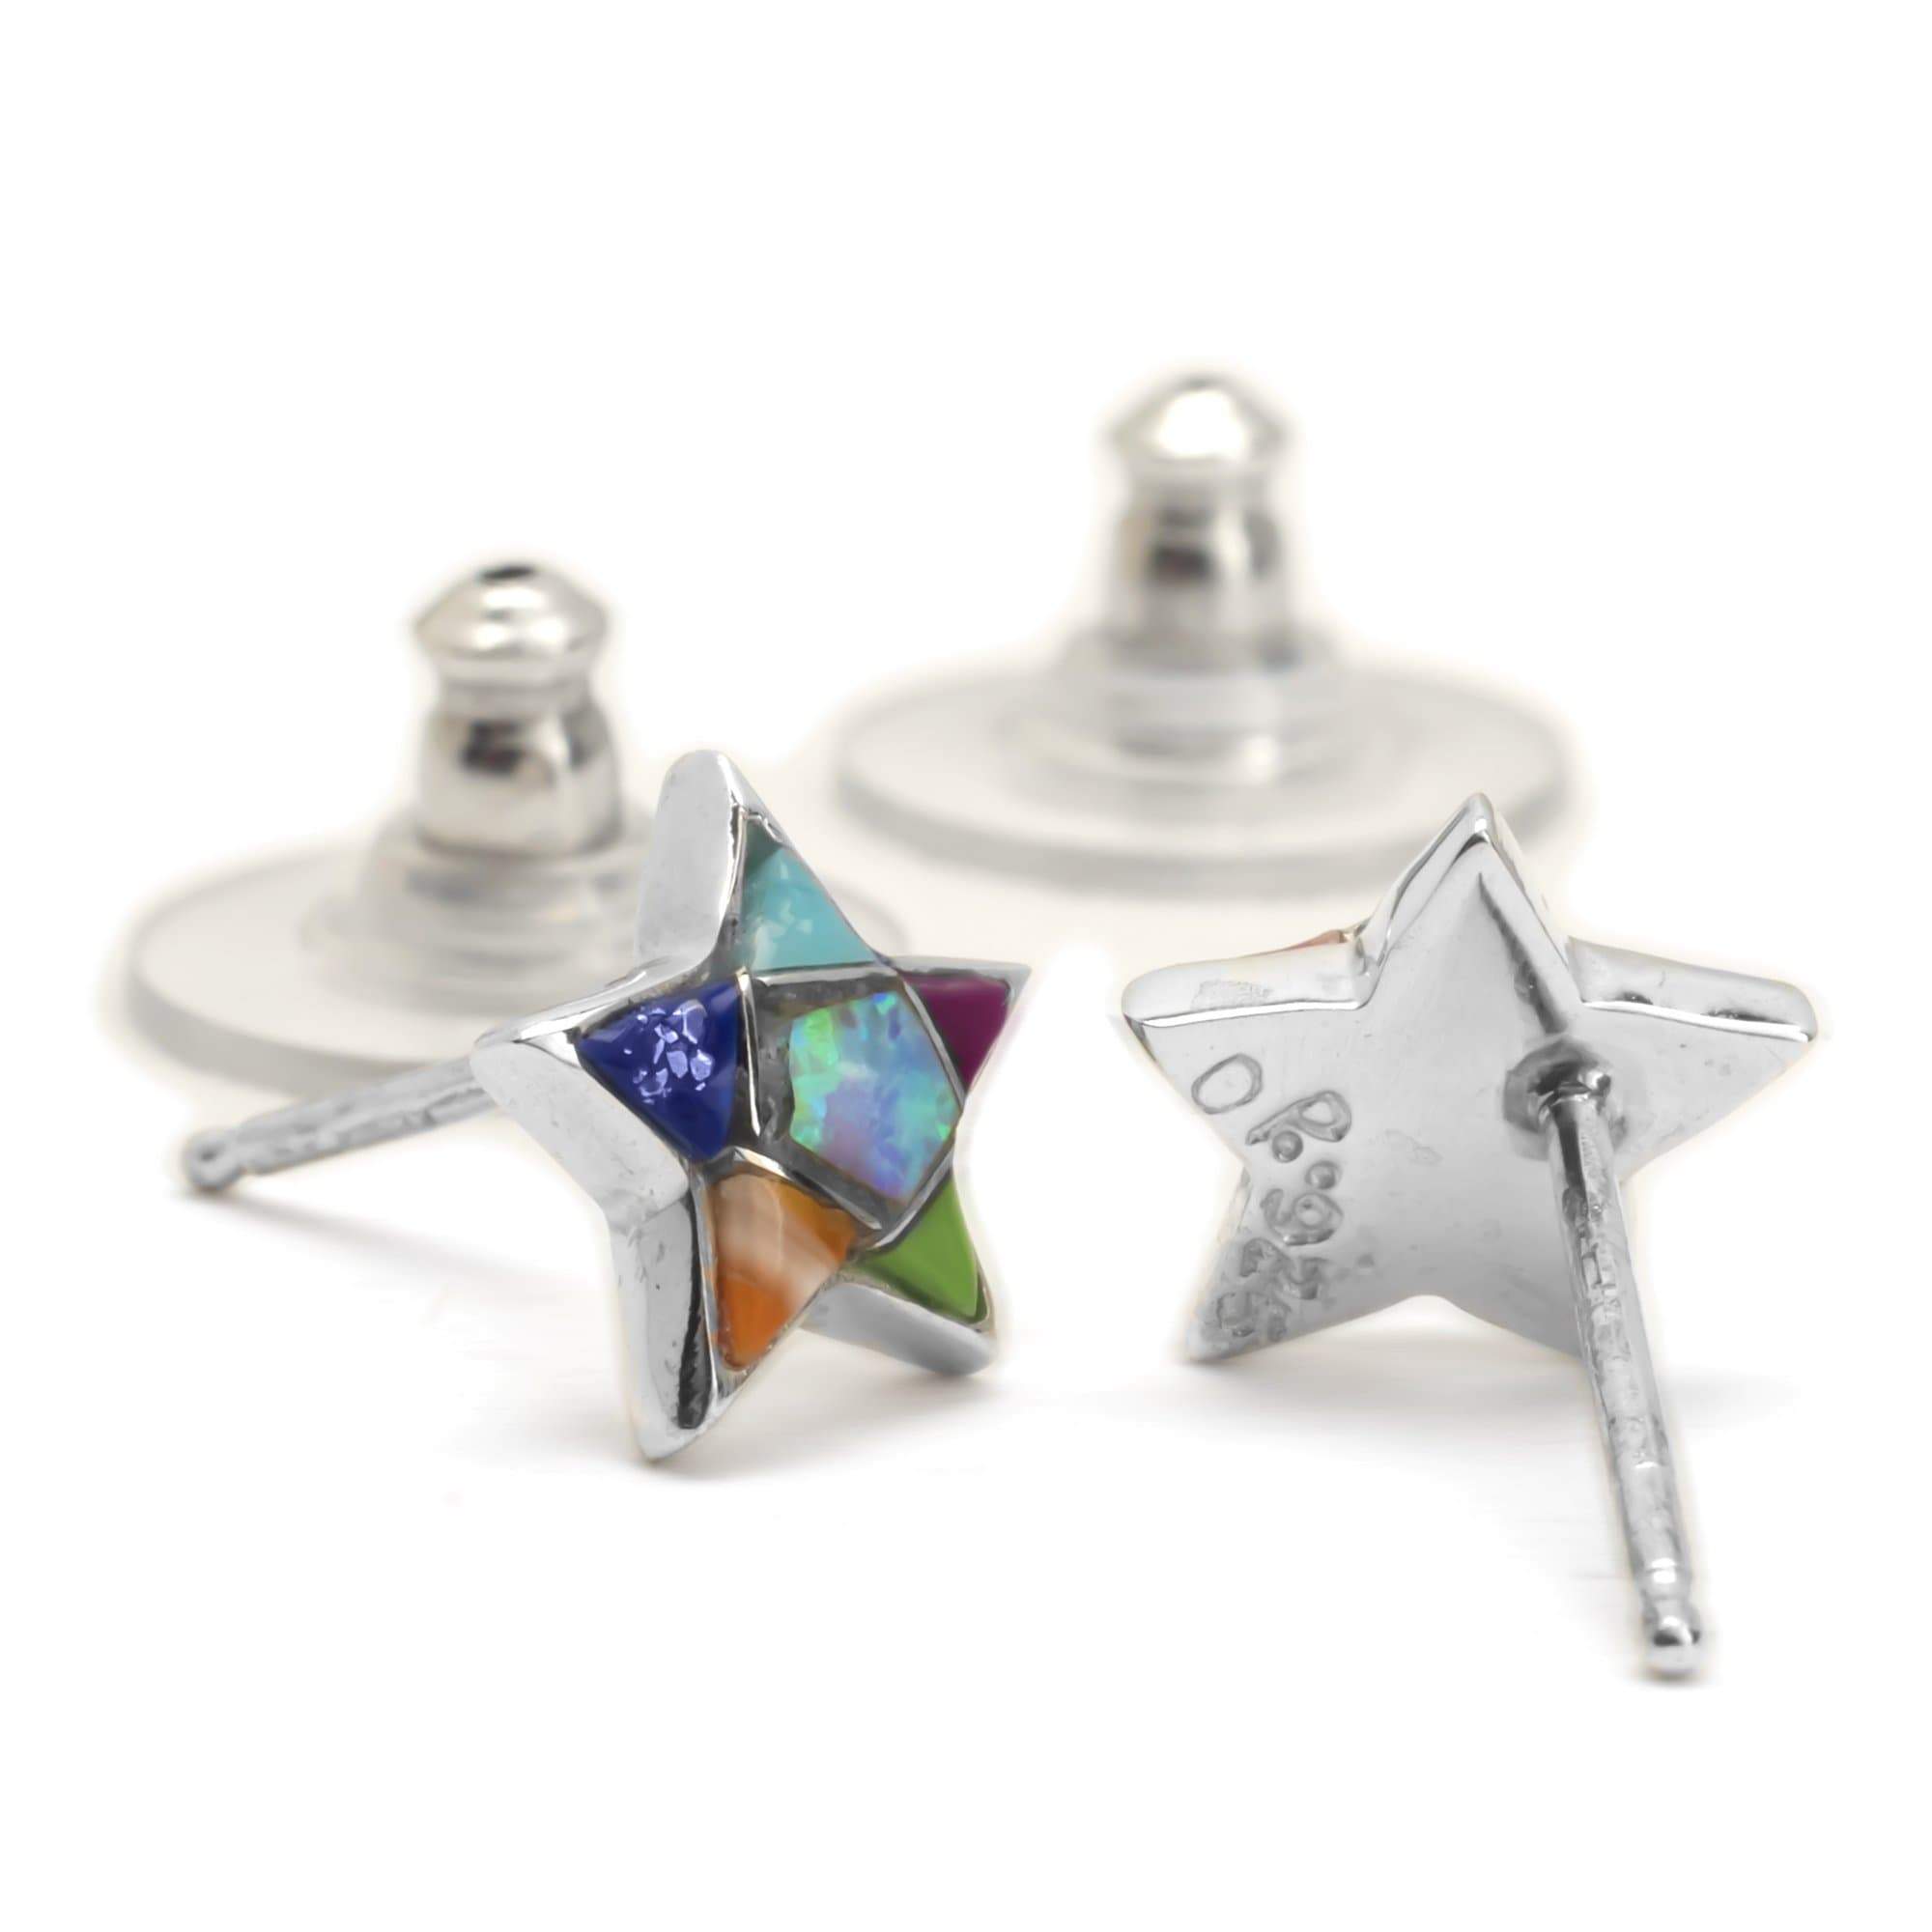 Kalifano Native American Jewelry Multi Gemstone Star 925 Sterling Silver Earring with Stud Backing USA USA Handmade NME.2243.MT